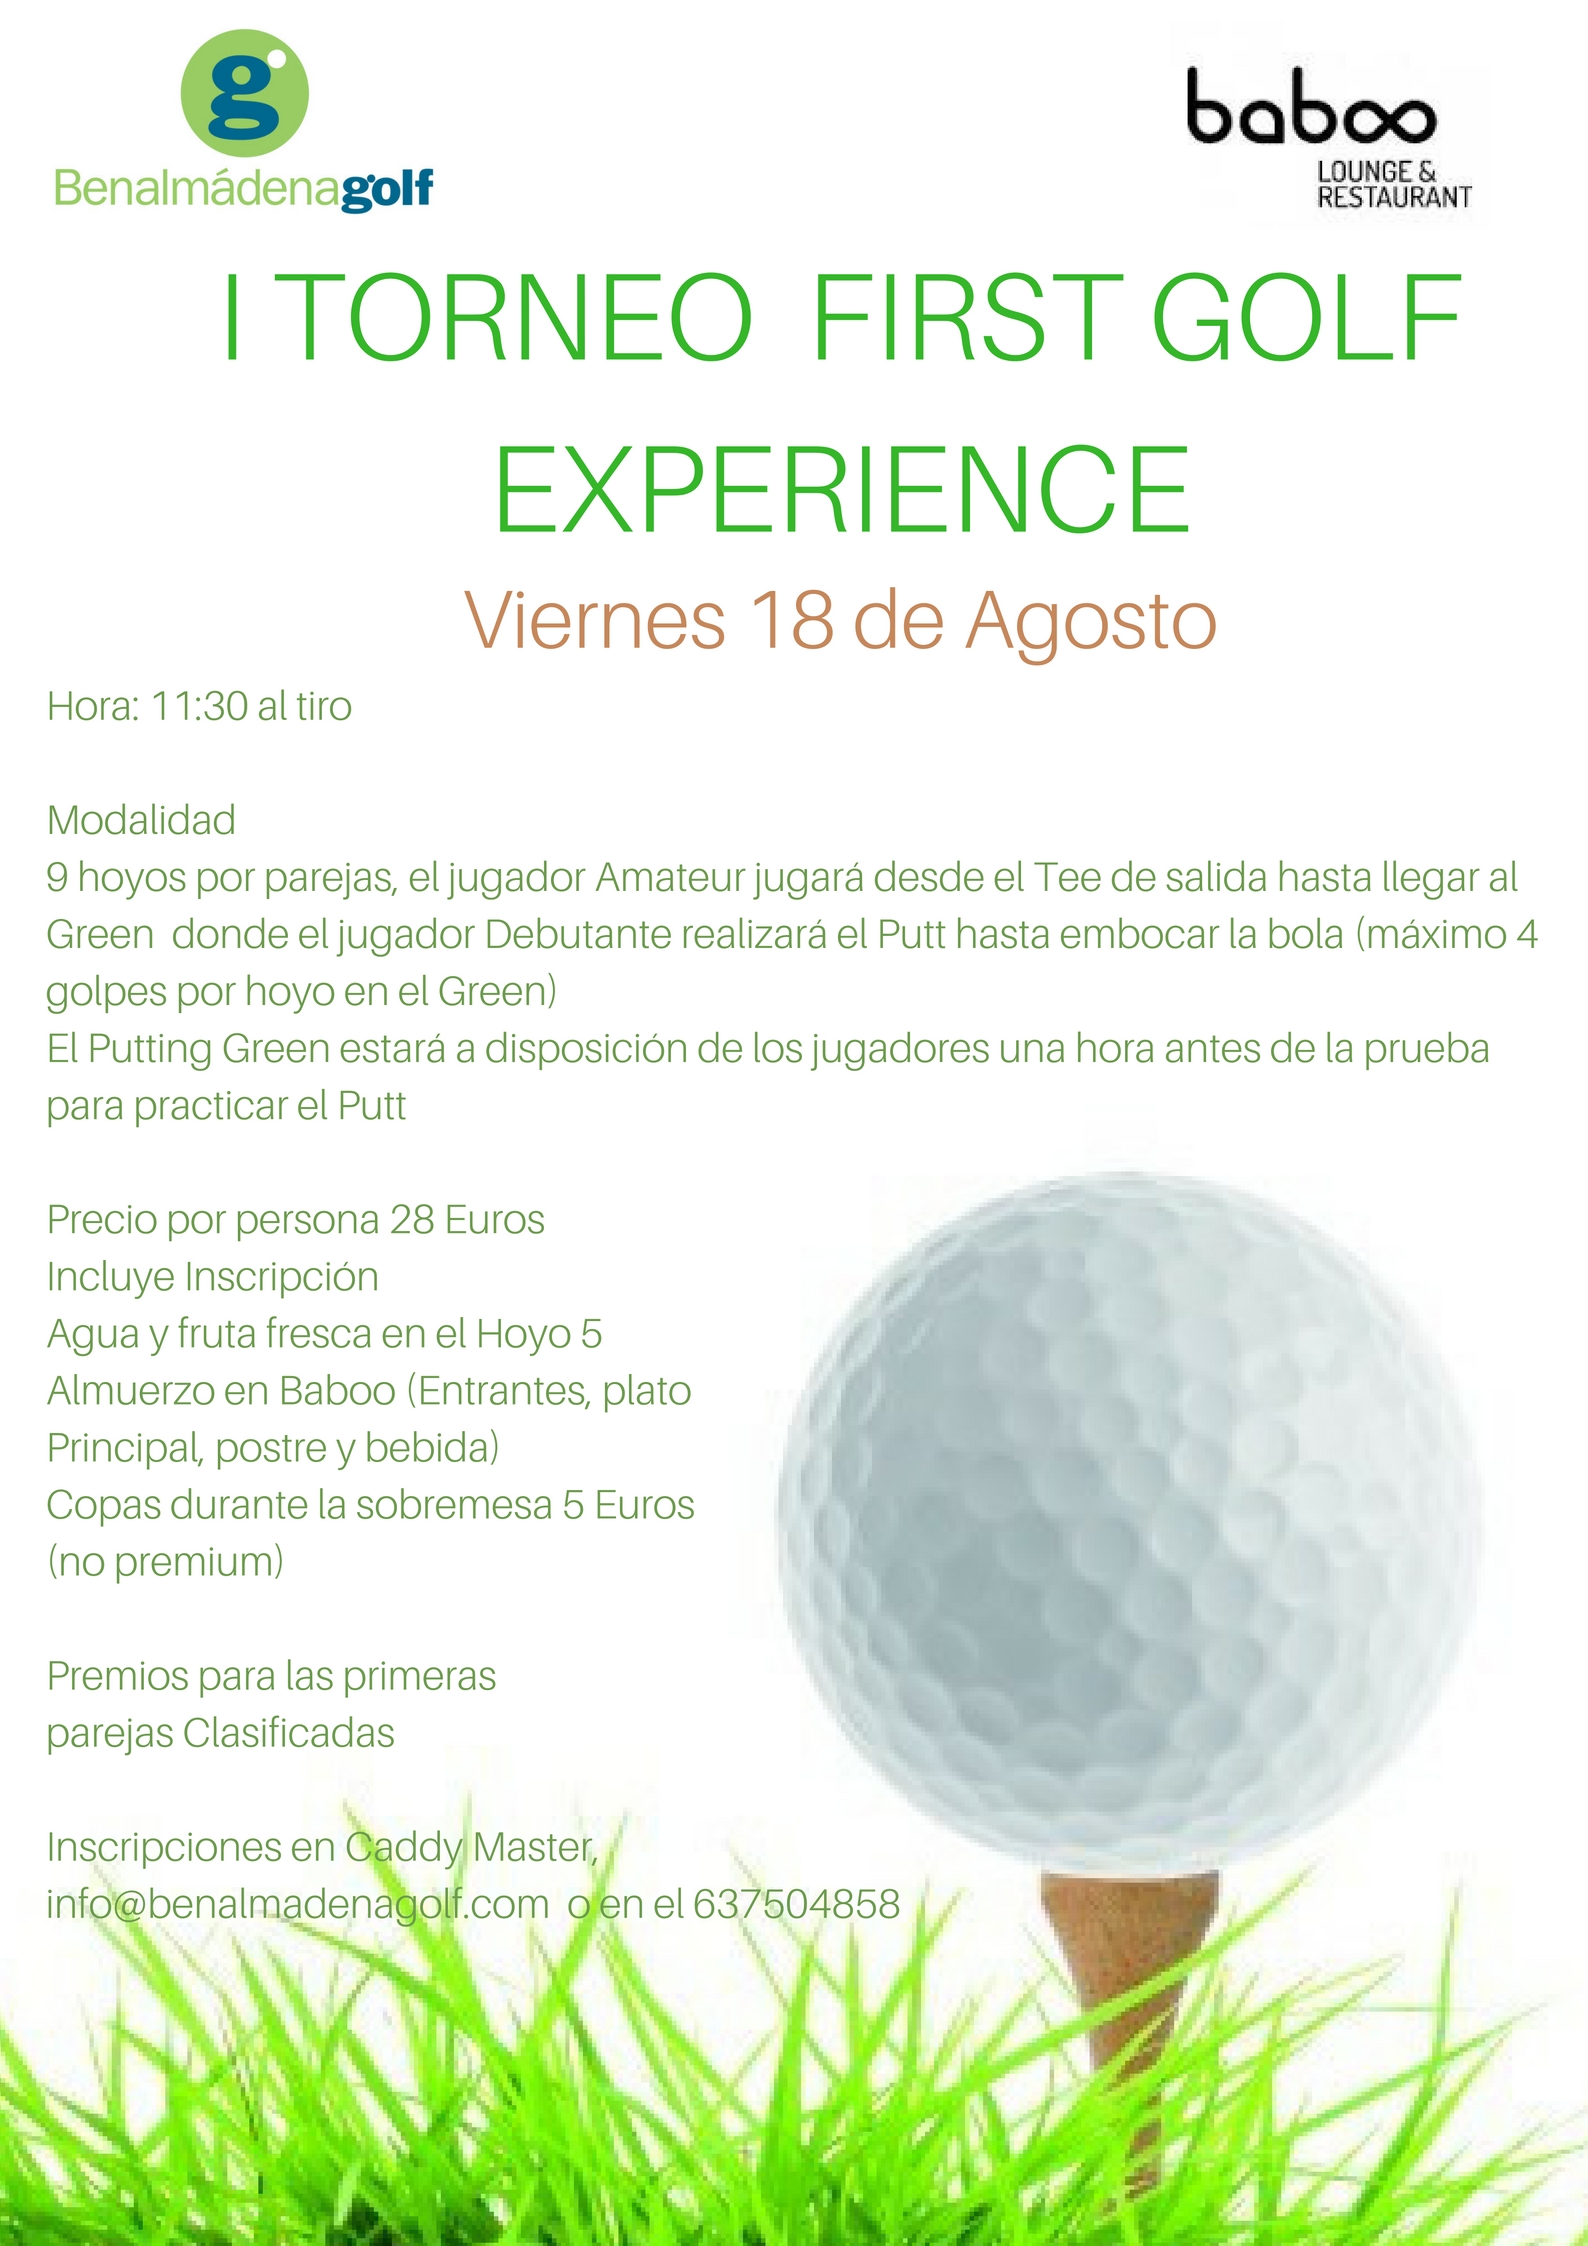 I TORNEO FIRST GOLF EXPERIENCE